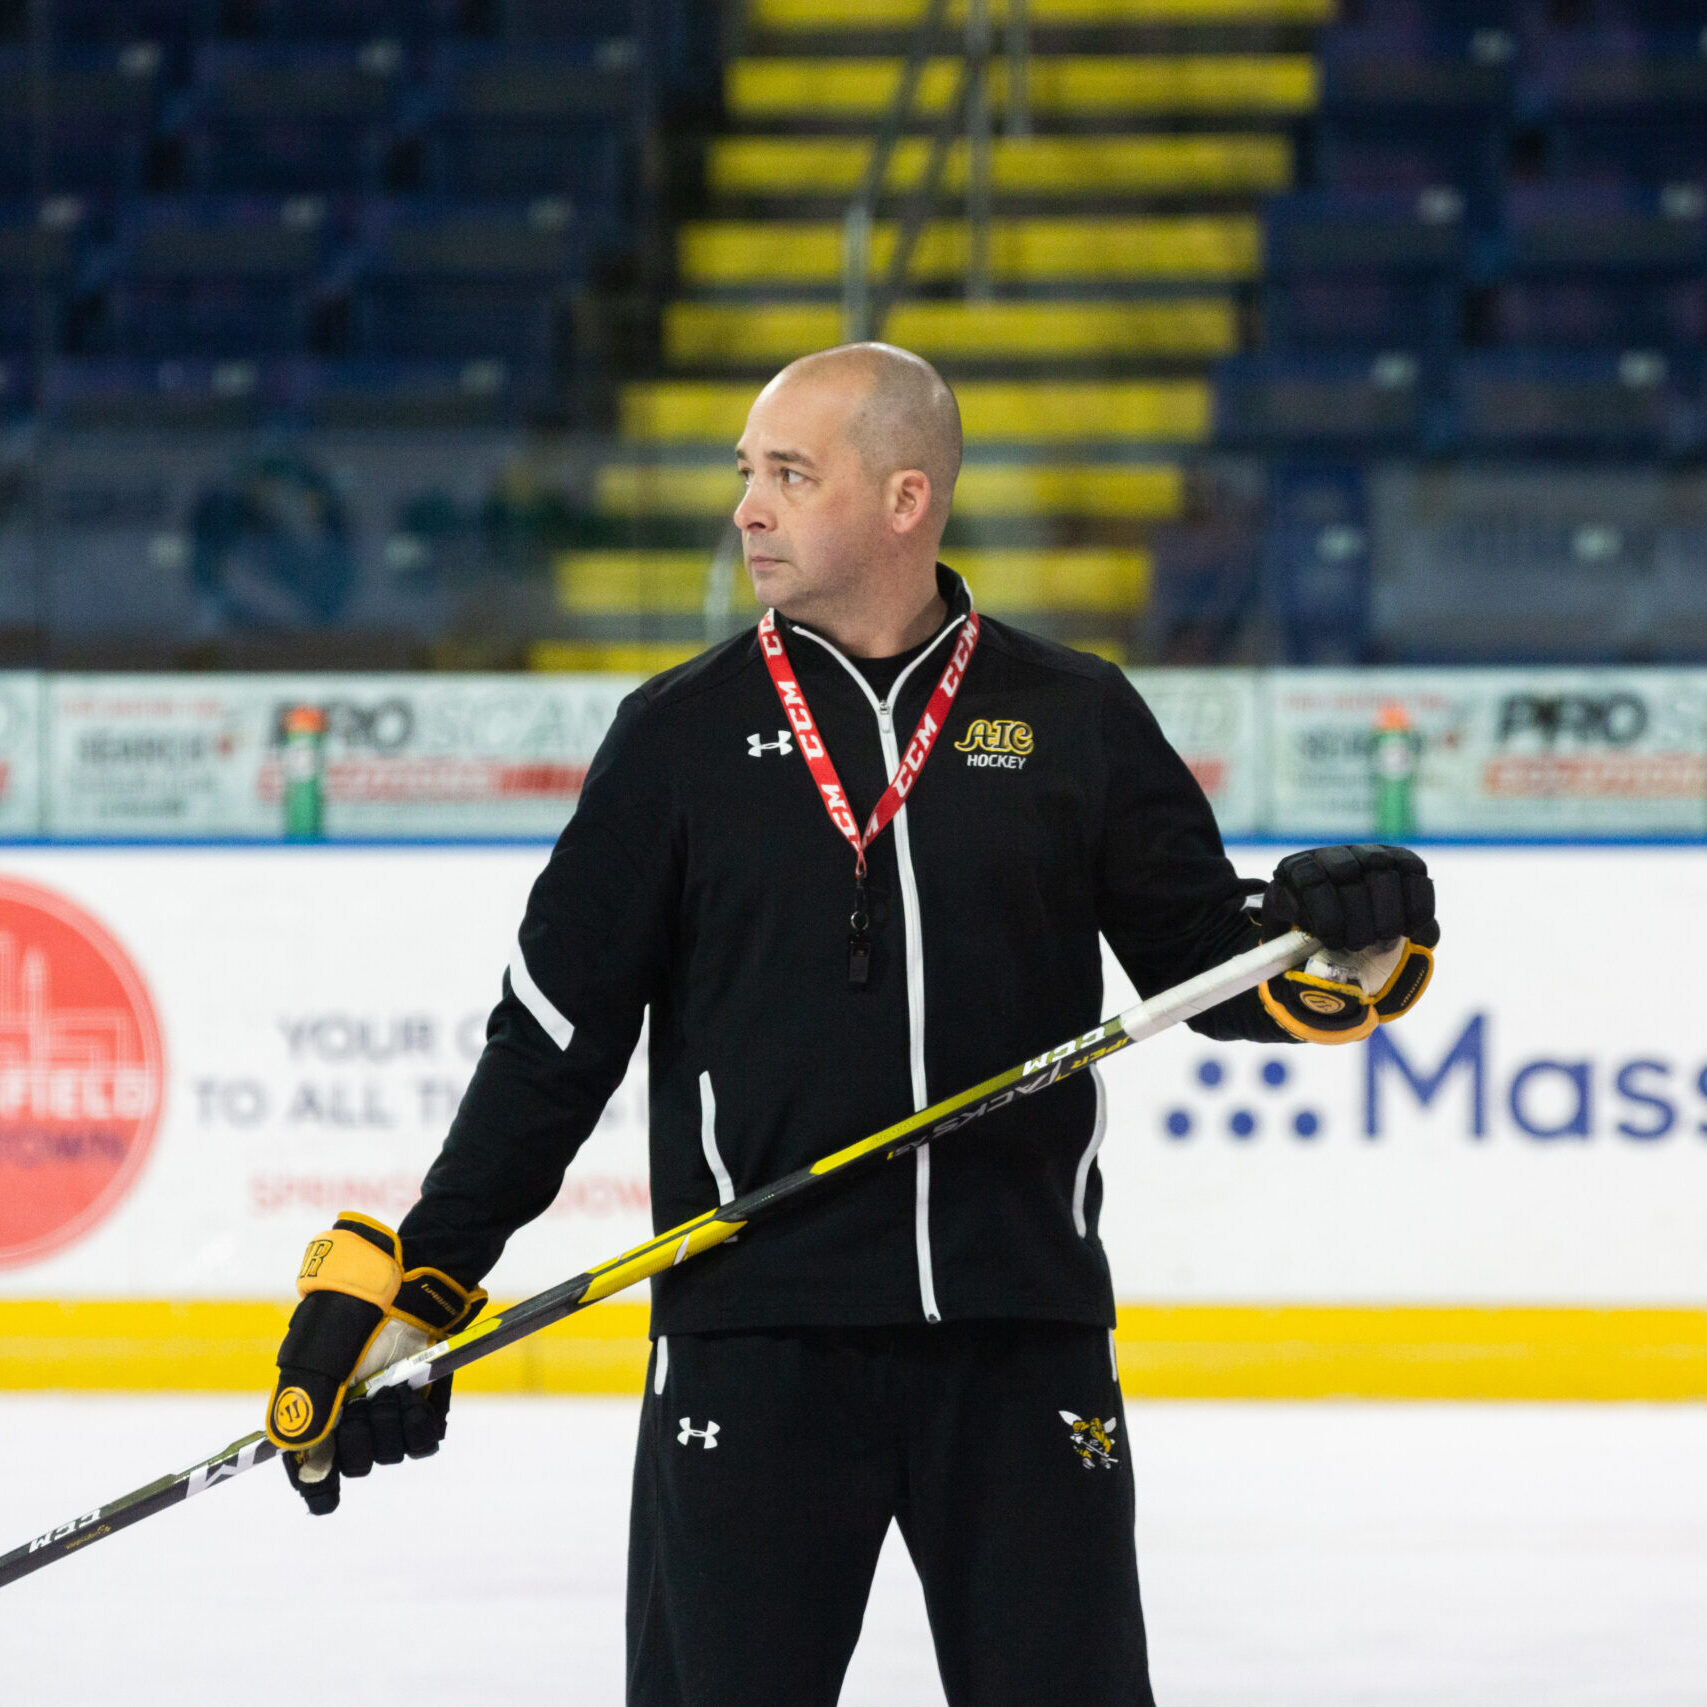 3/8/2019 - Springfield - American International College's ice hockey team practices at the MassMutual Center on Friday. This is head coach Eric Lang. (Hoang 'Leon' Nguyen / The Republican)